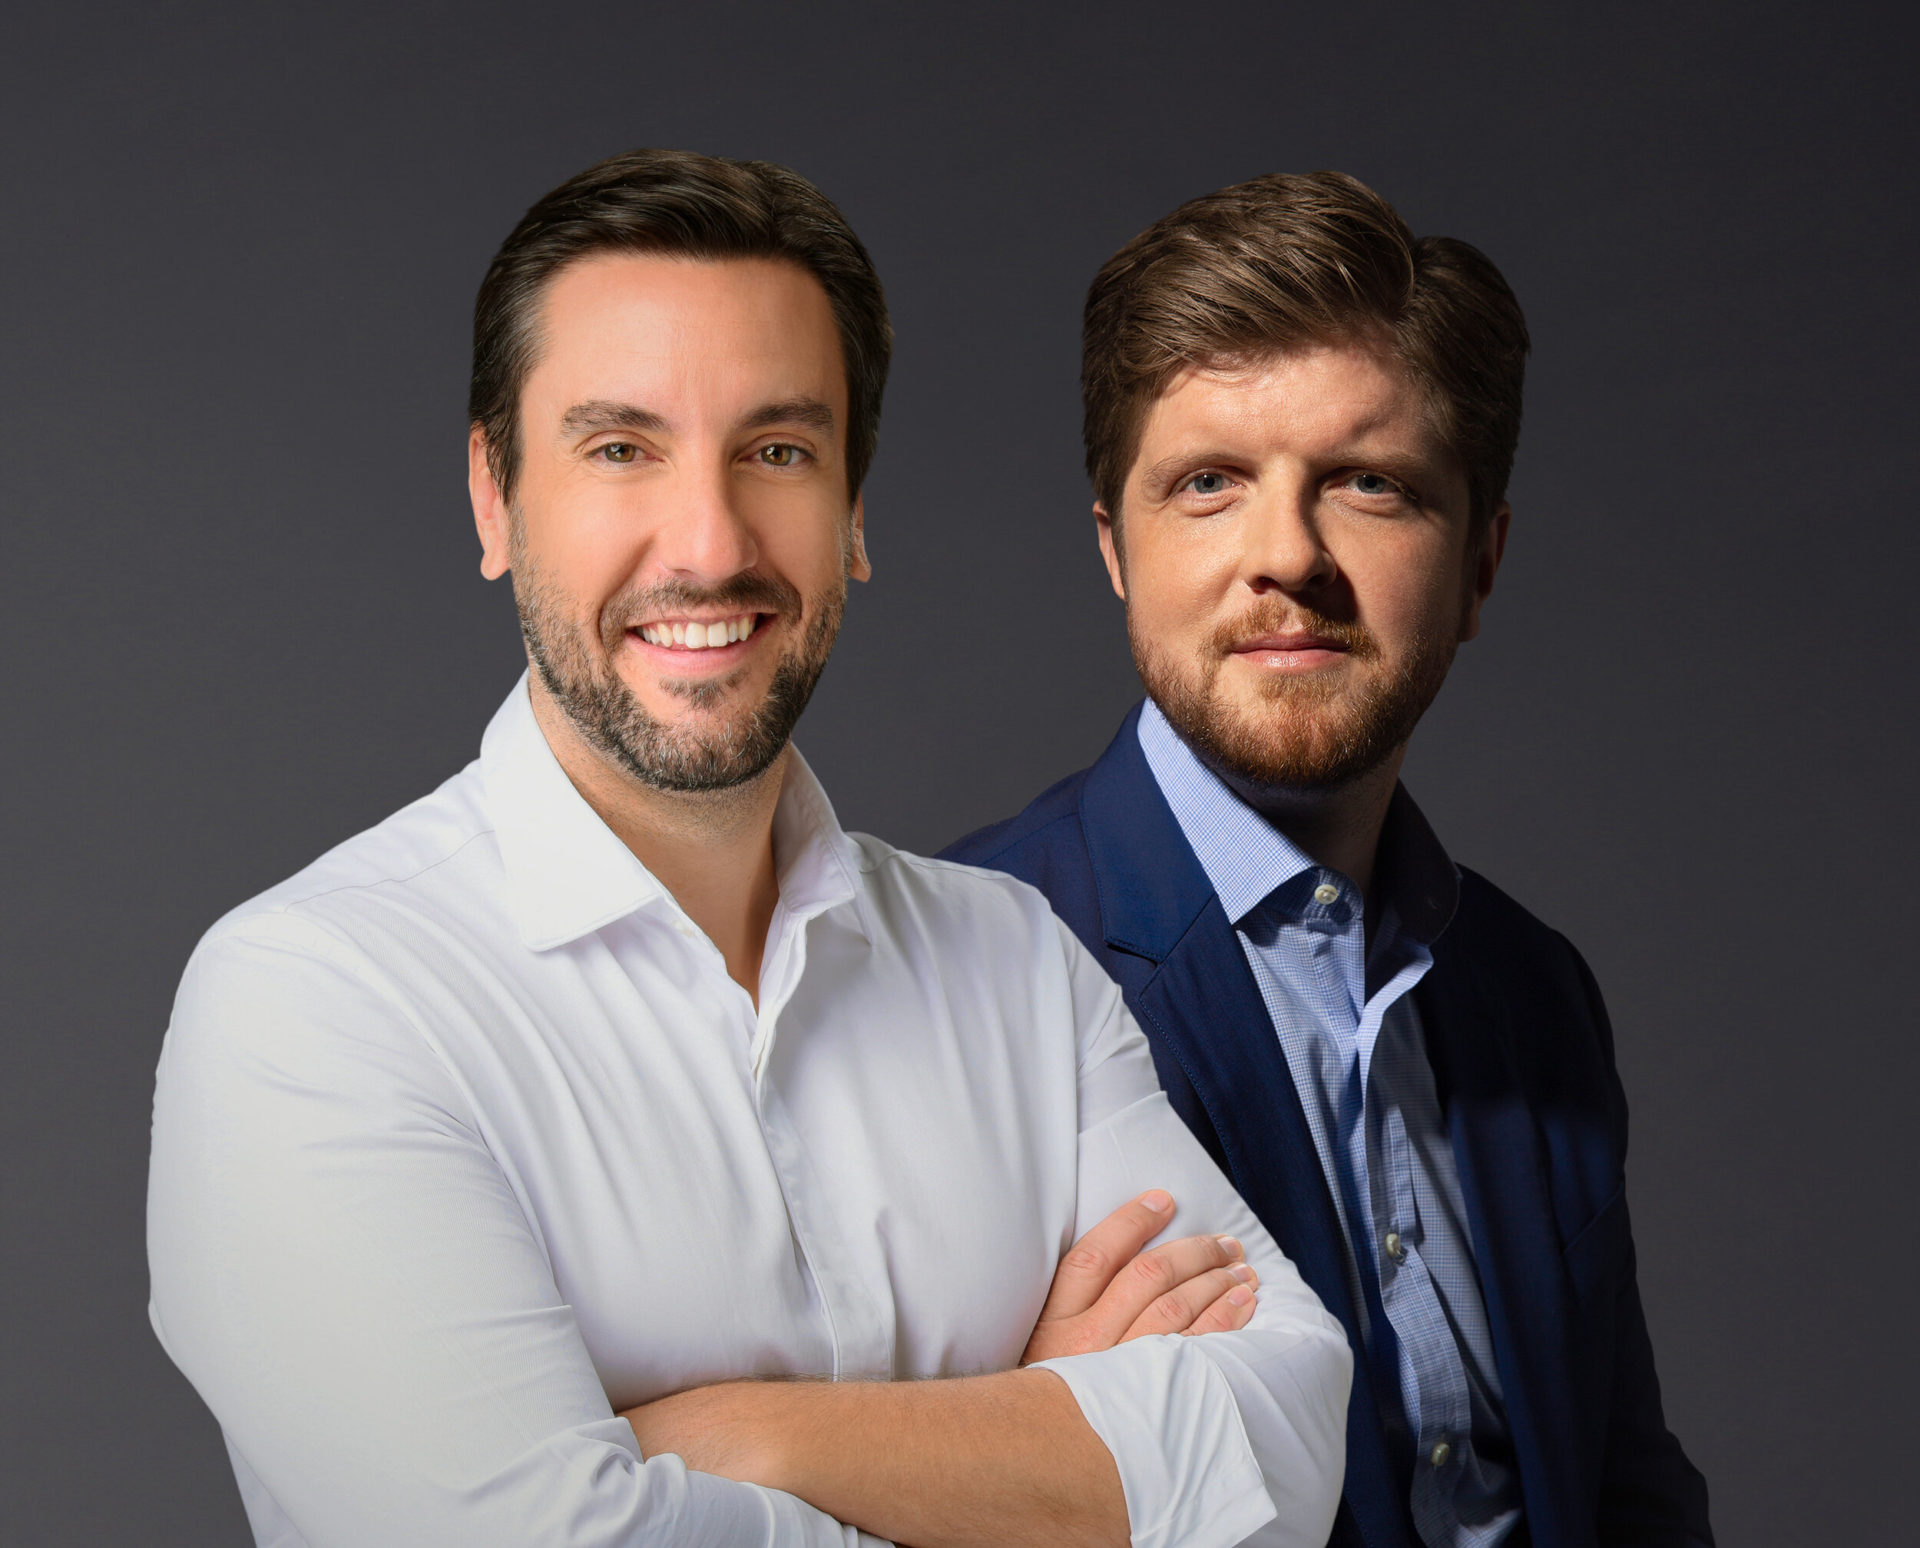 Clay Travis (left) and Buck Sexton (right) (Photo courtesy of Premiere Networks)